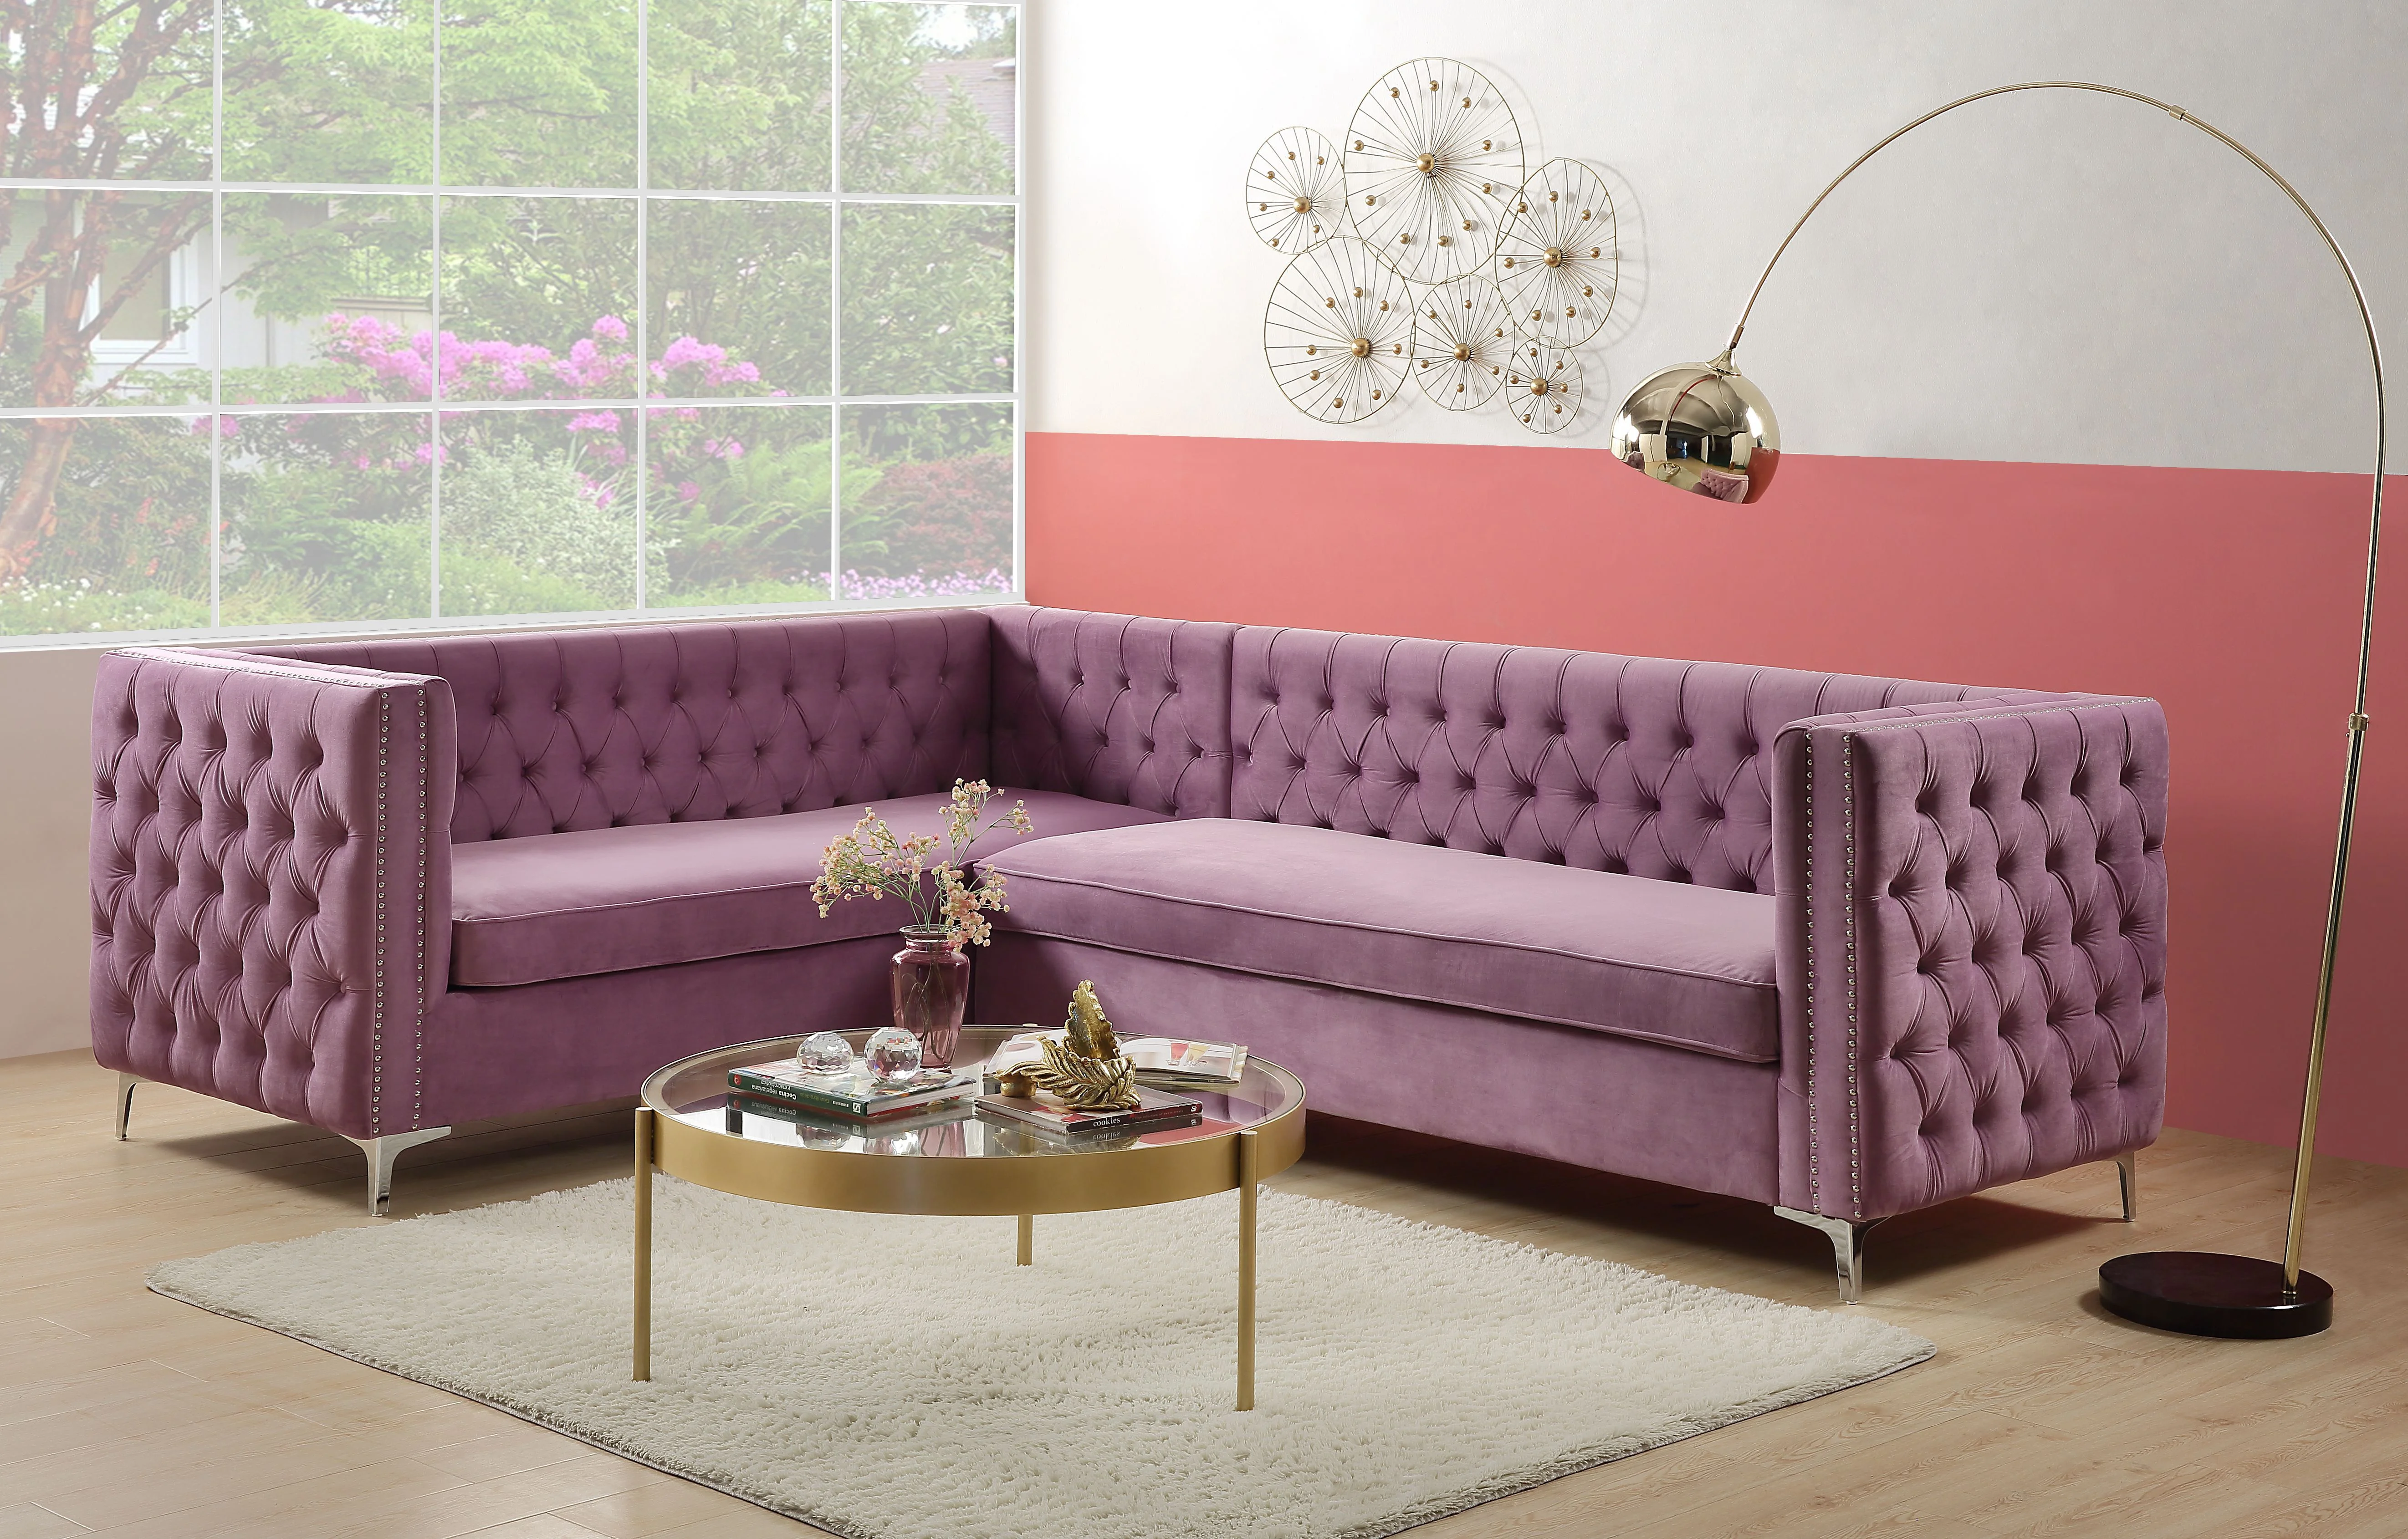 

83""L x 34""D x 34""H IN Classic Sectional Sofa Purple Velvet Minimalist And Modern Home Furniture Primary Living Space Sofas